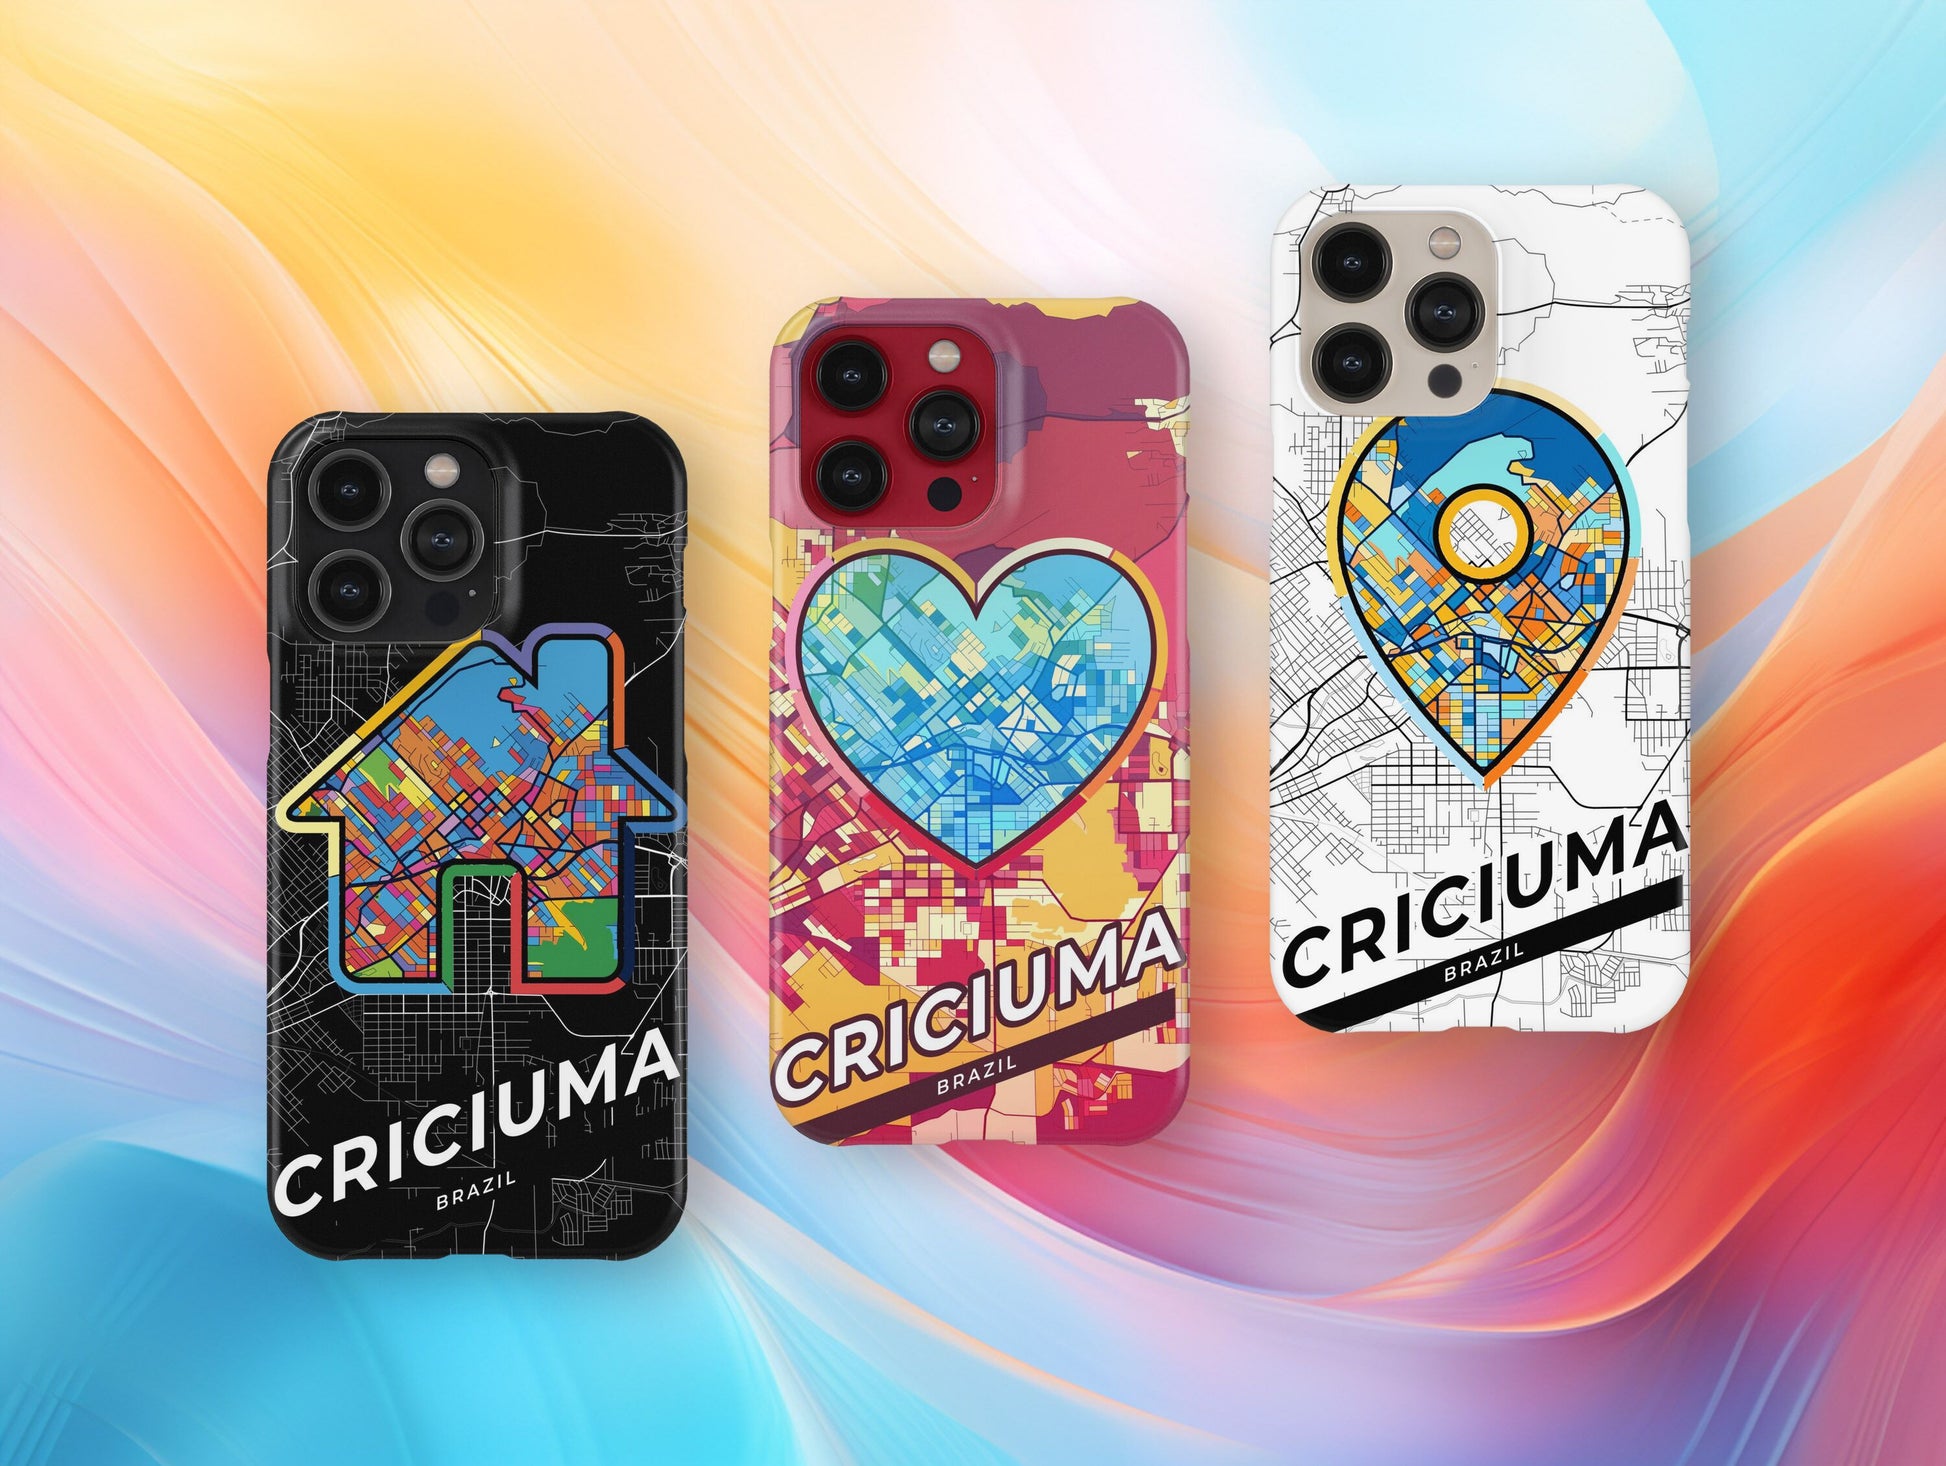 Criciuma Brazil slim phone case with colorful icon. Birthday, wedding or housewarming gift. Couple match cases.